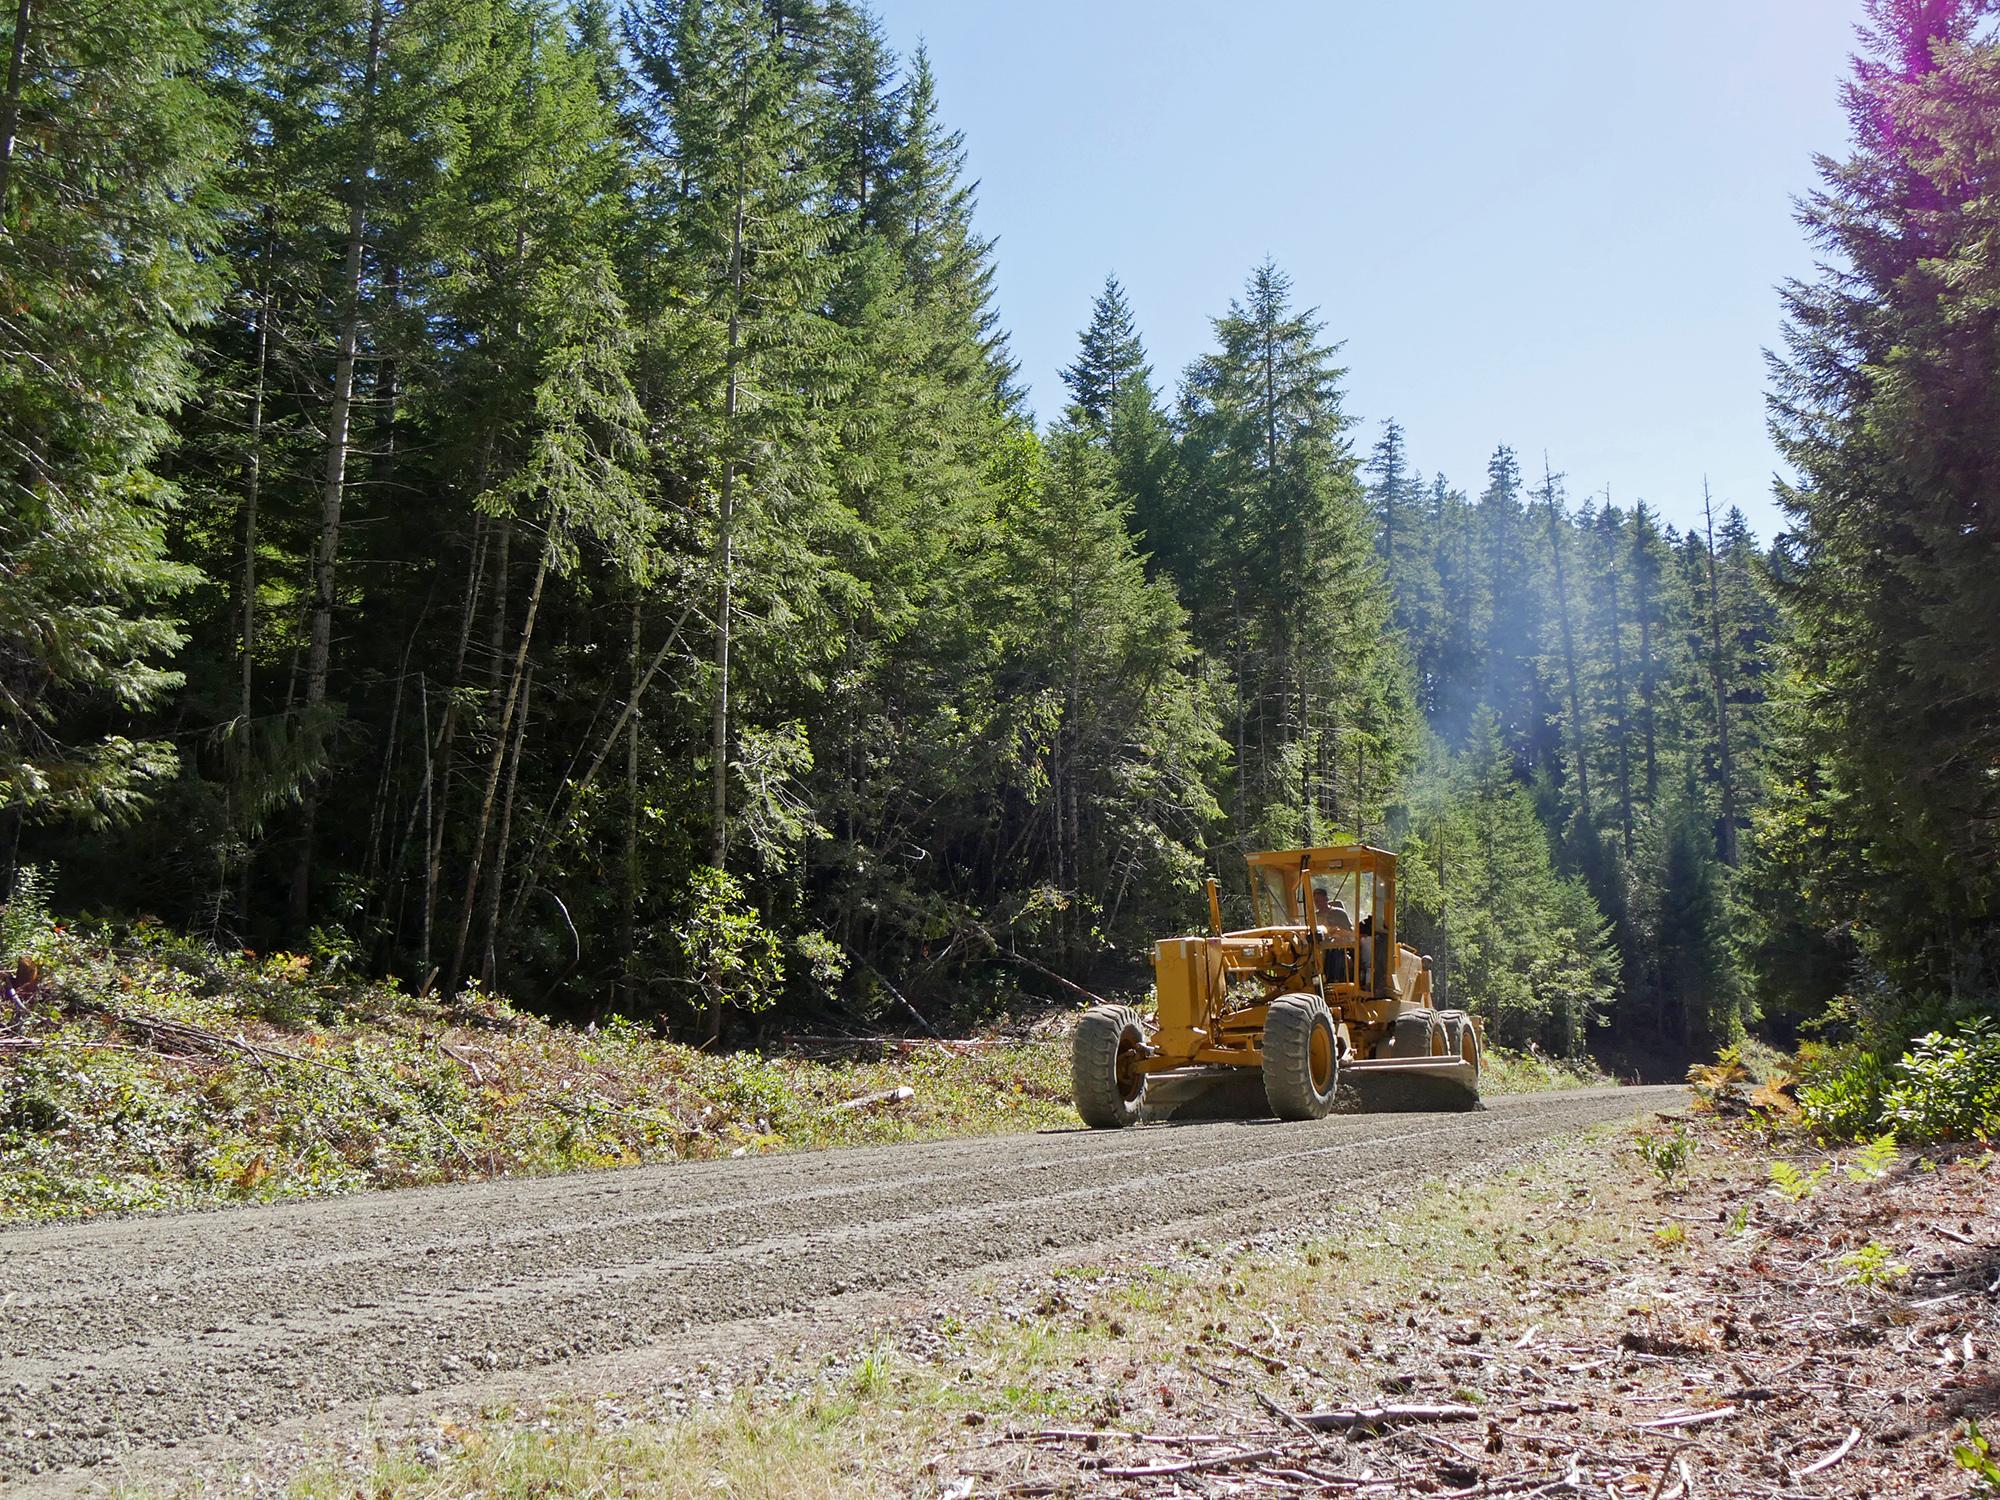 A yellow piece of heavy equipment called a grater, works to improve a dirt road in the middle of the forest.